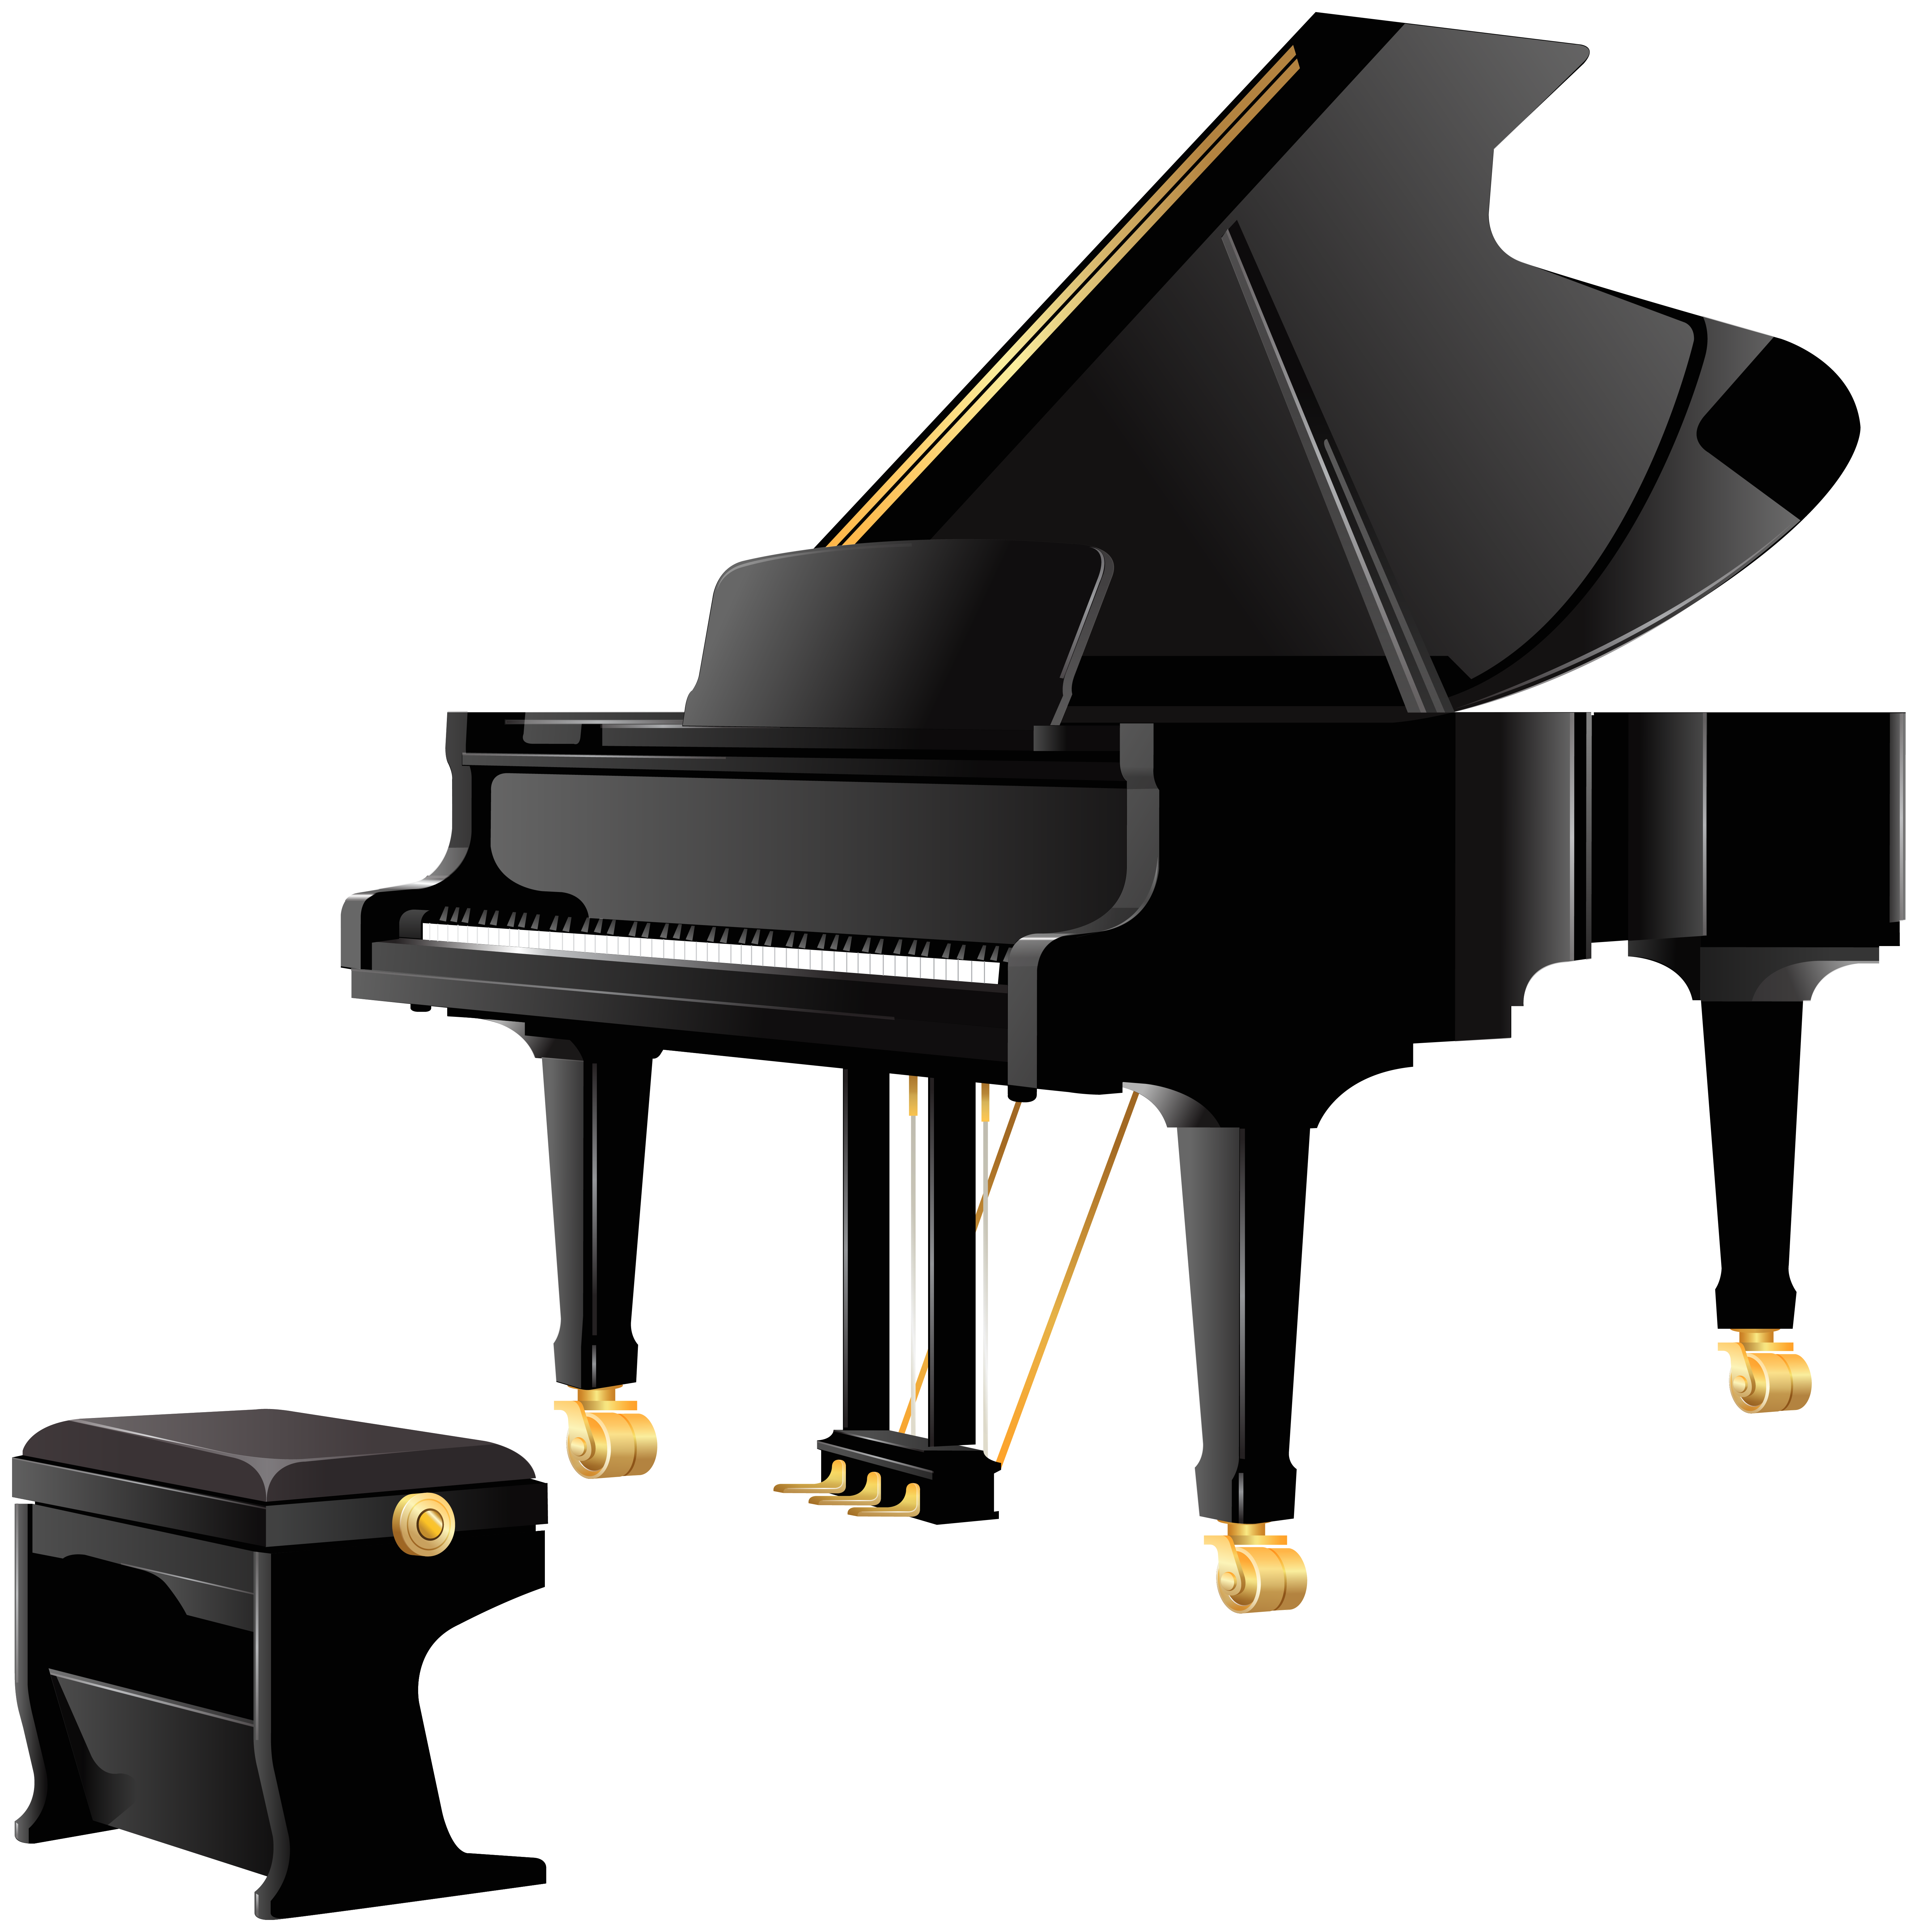 Festival clipart instrument. Royal grand piano png